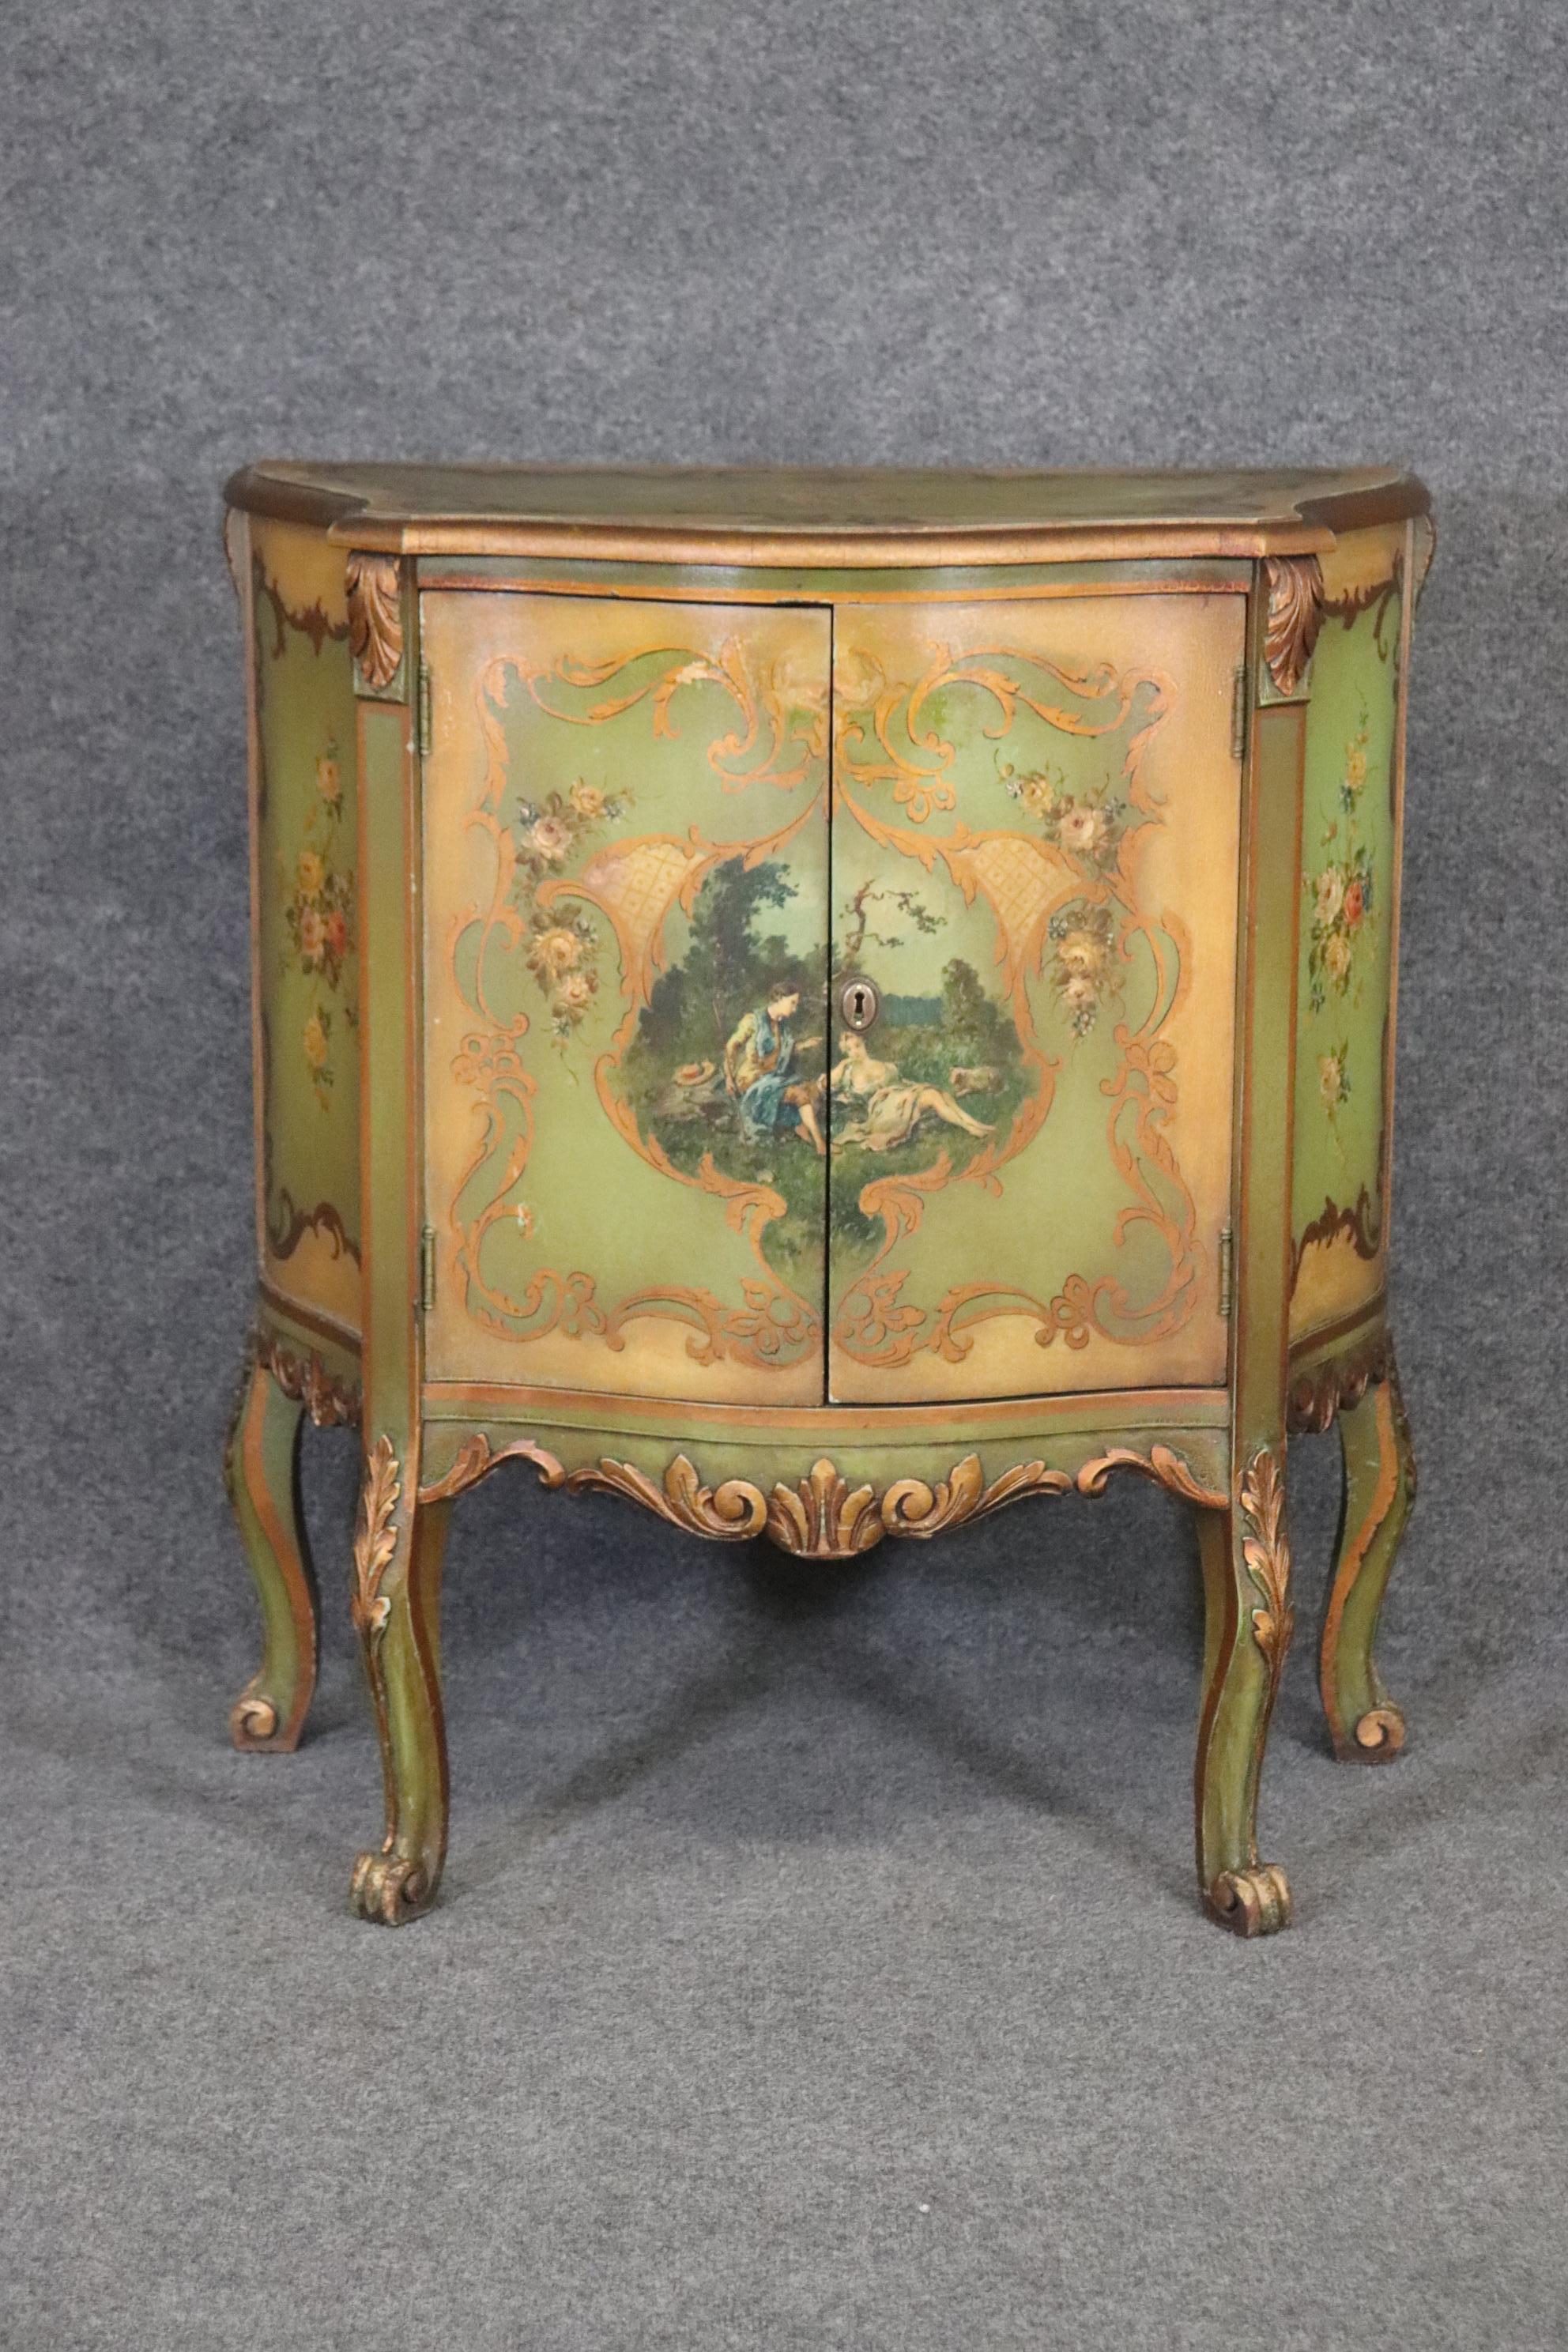 Dimensions- H: 33 3/4in W: 31 1/4in D: 17 1/2in This Antique venetian Style Paint Decorated Commode, Chest of Drawers, Chest is made of the highest quality and is perfect for you and your home! This Commode is equipped with highly detailed hand